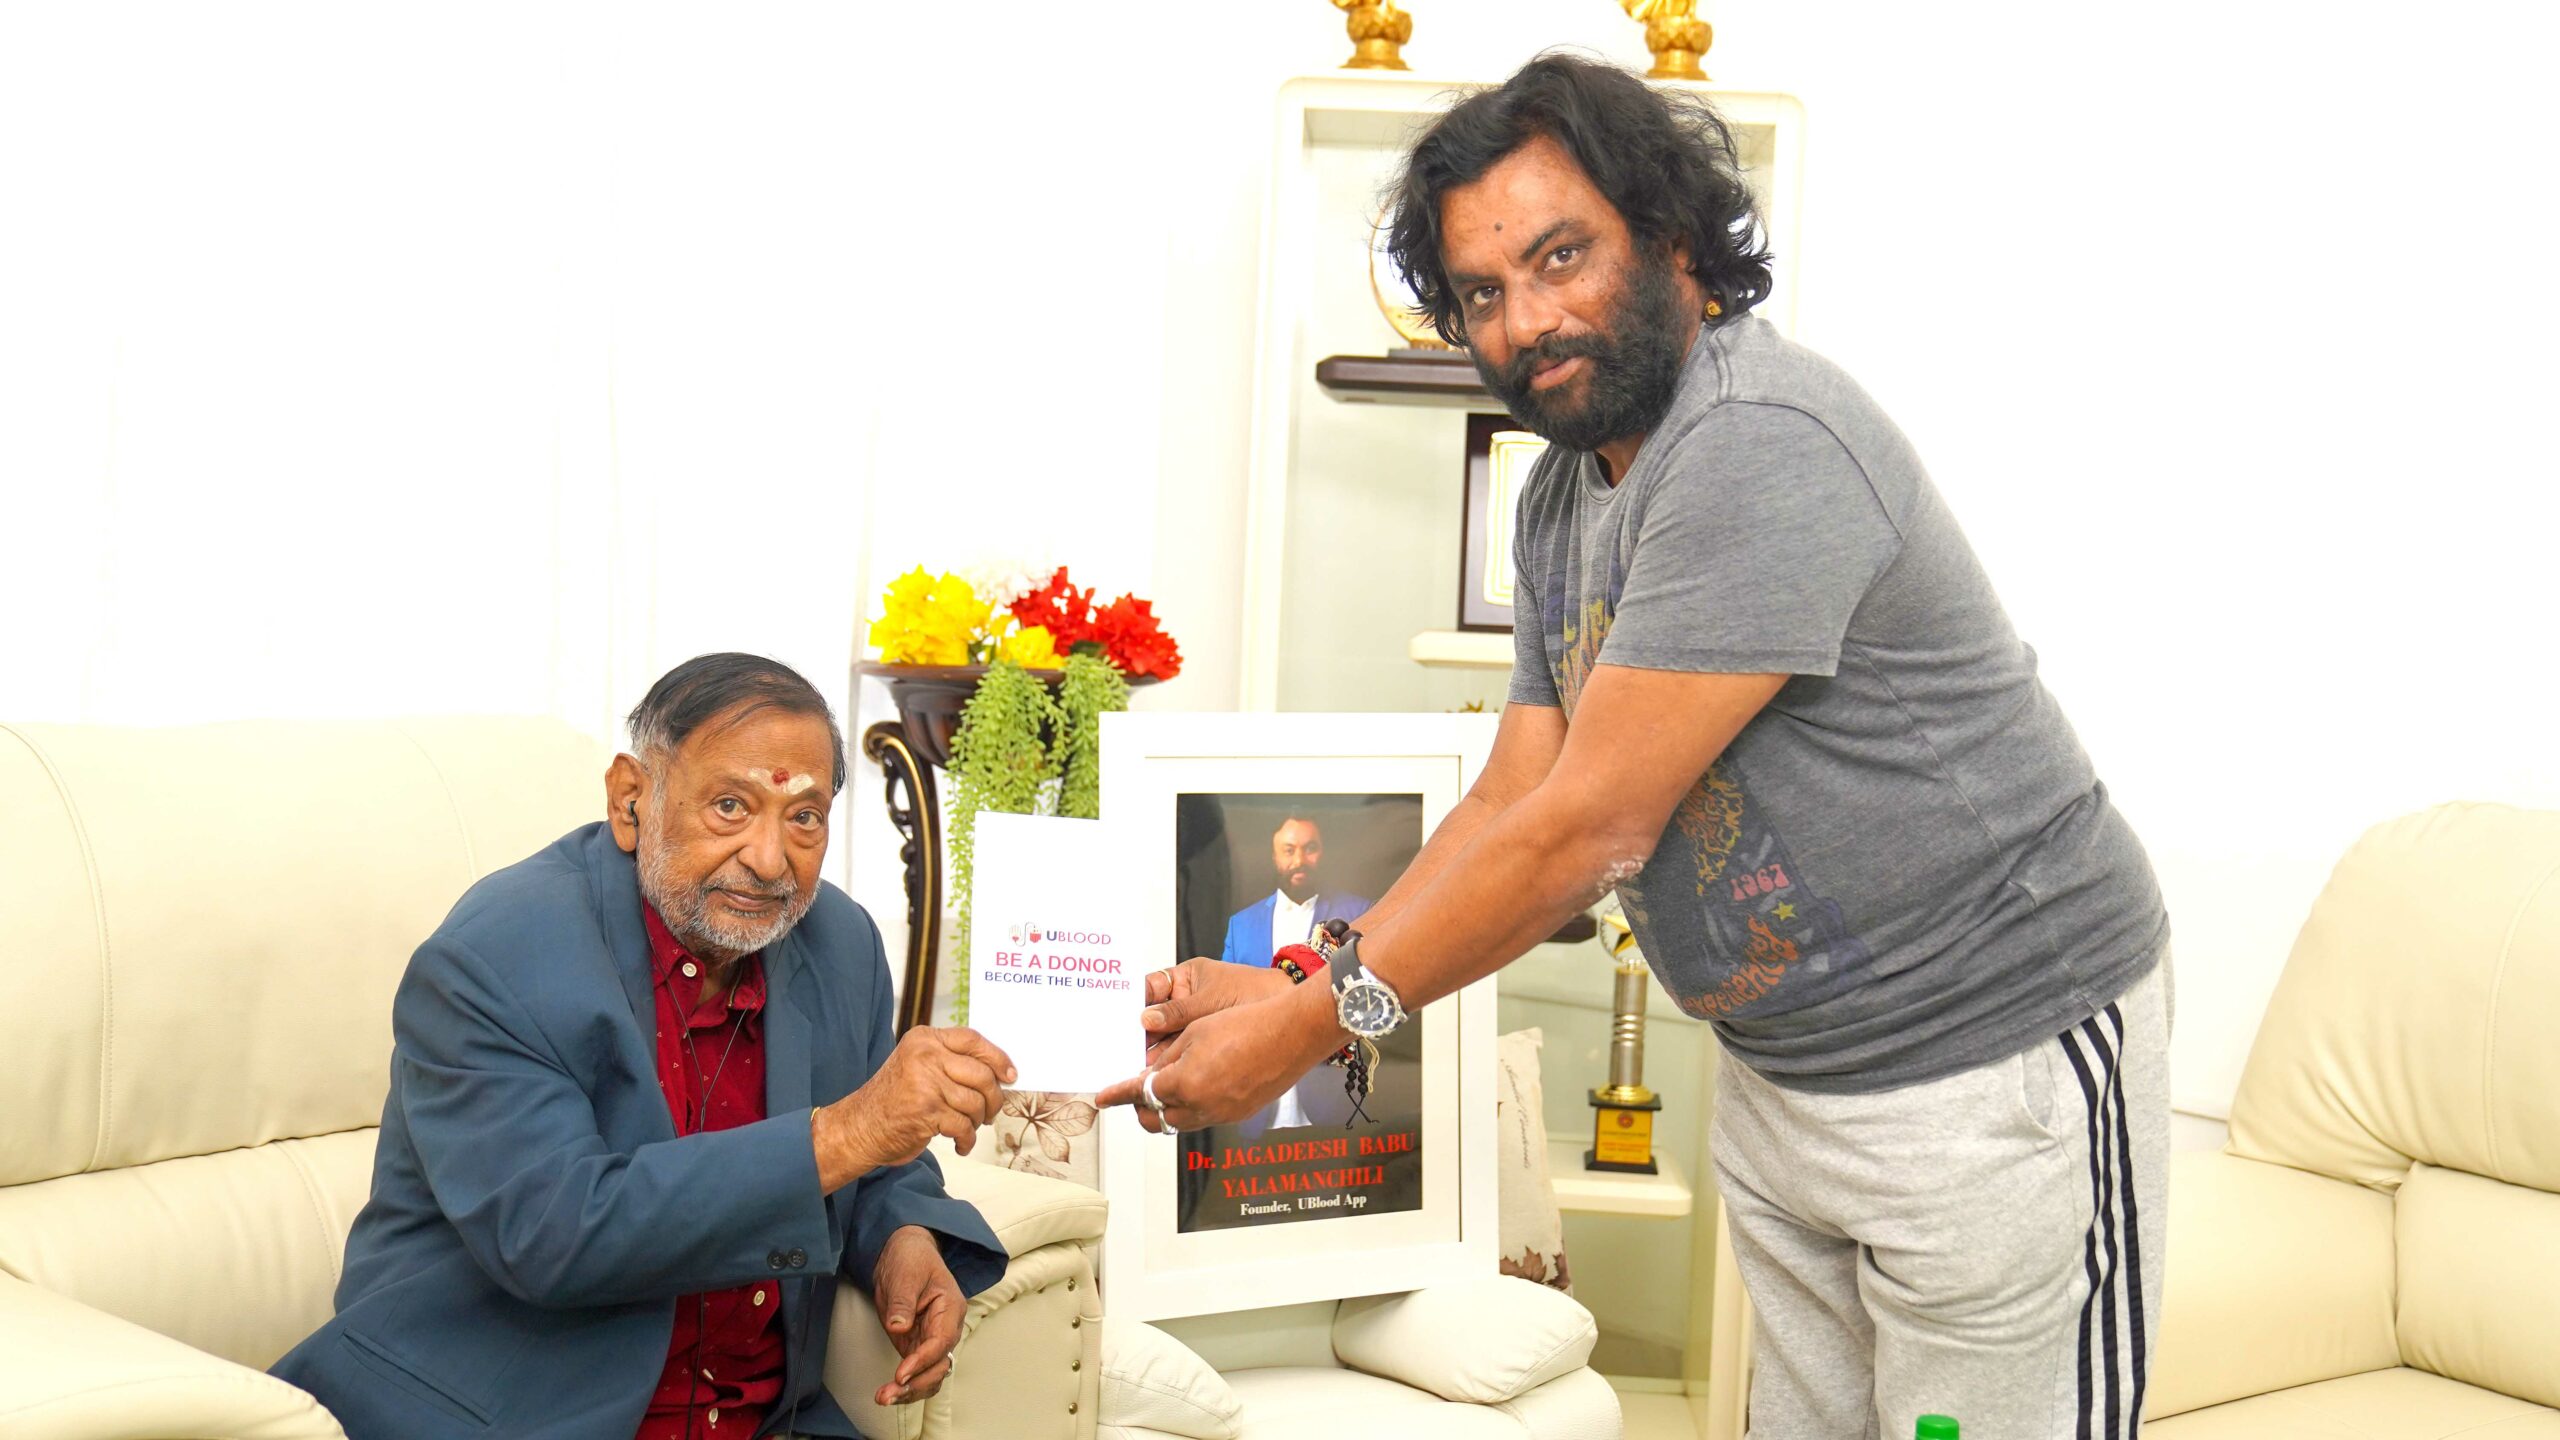 Chandramohan reminisced the memories with Super Star Krishna